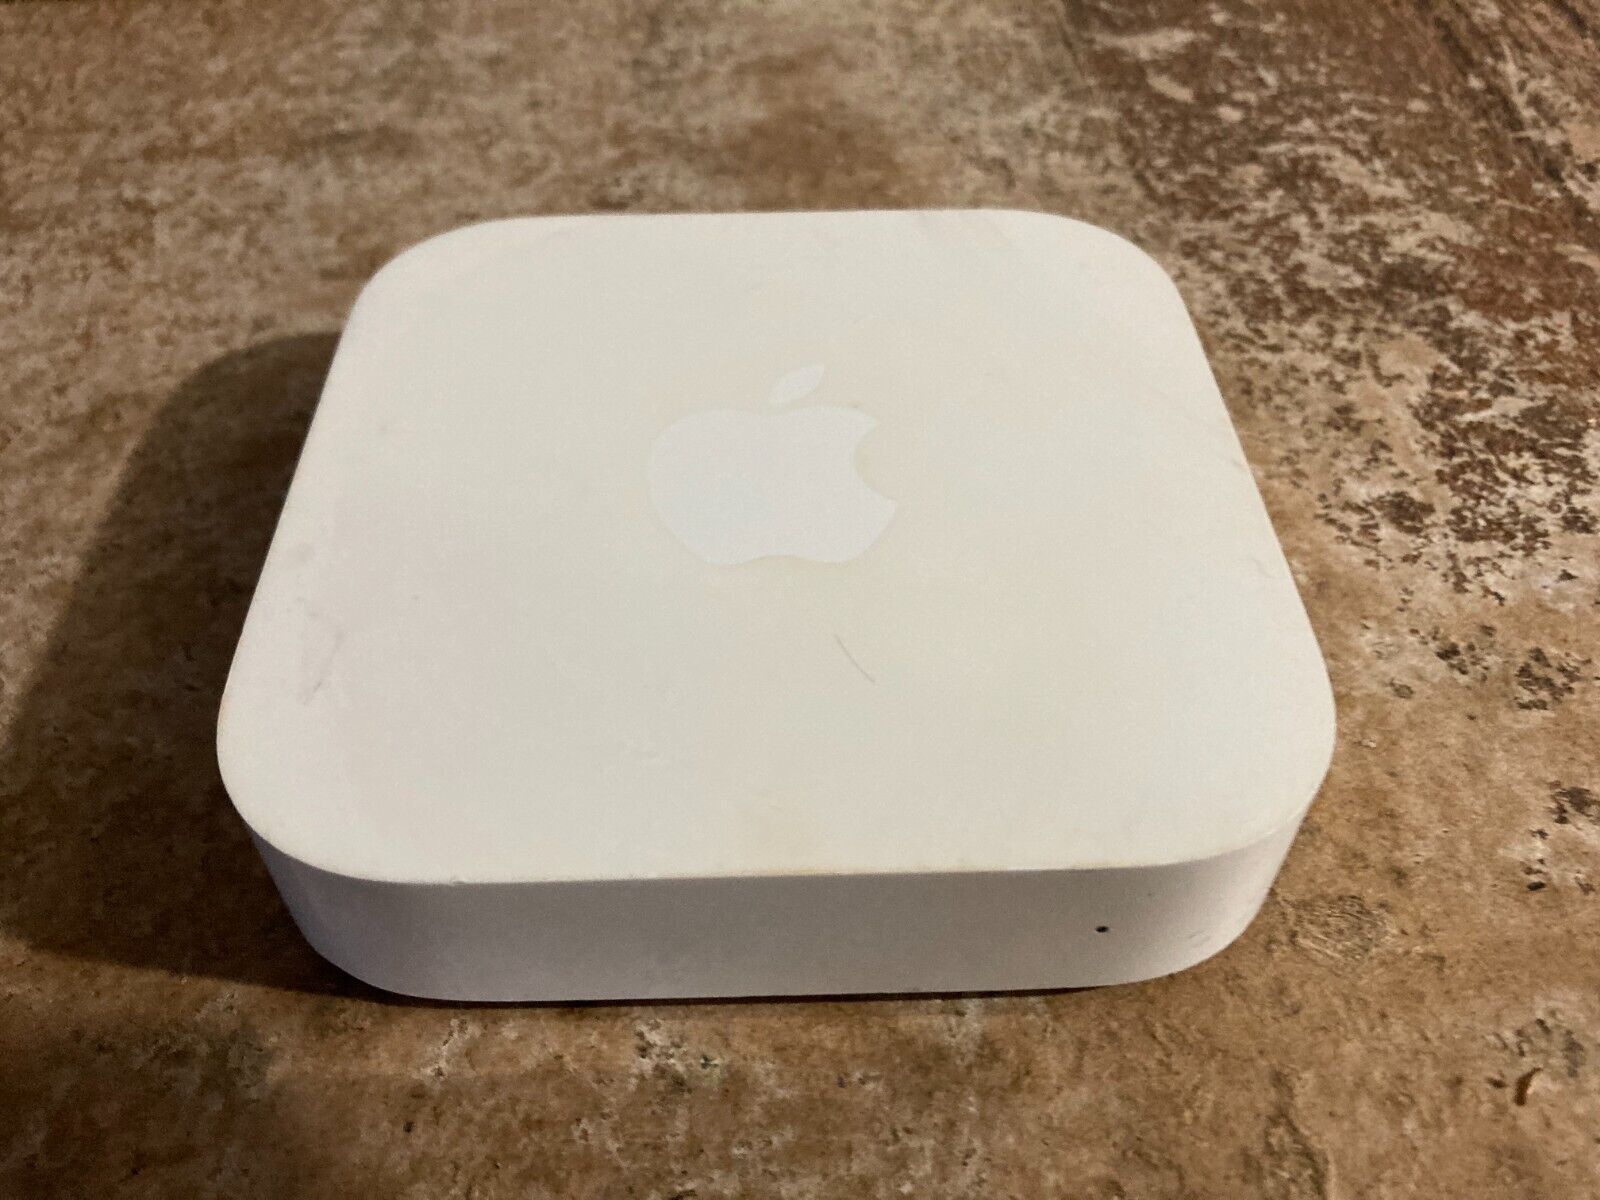 Apple AirPort Express Base Station [2nd Generation] Router White A1392 no Cord